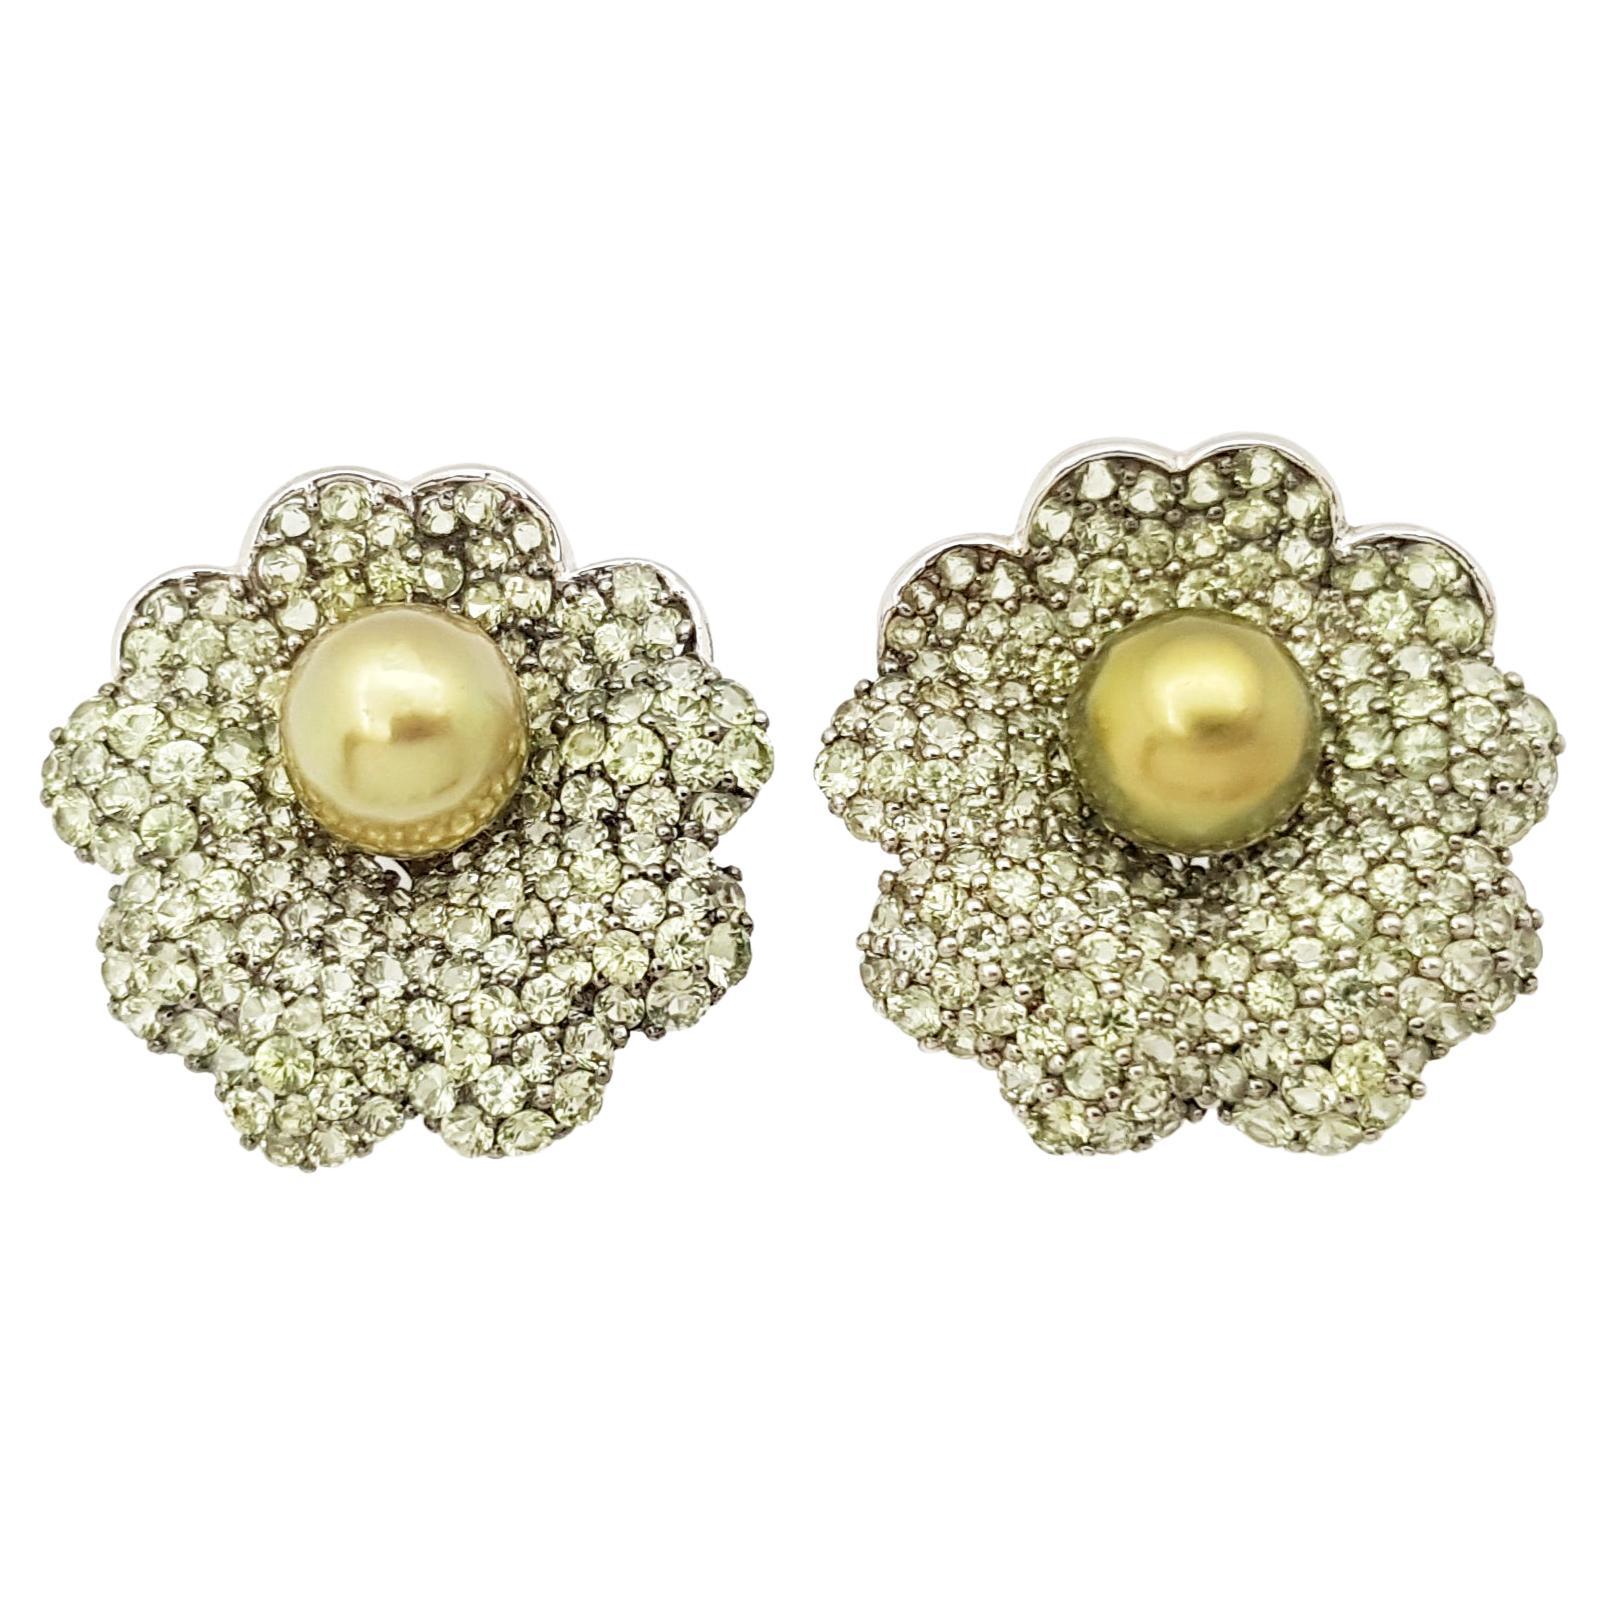 South Sea Pearl with Green Sapphire Earrings Set in 18 Karat White Gold Settings